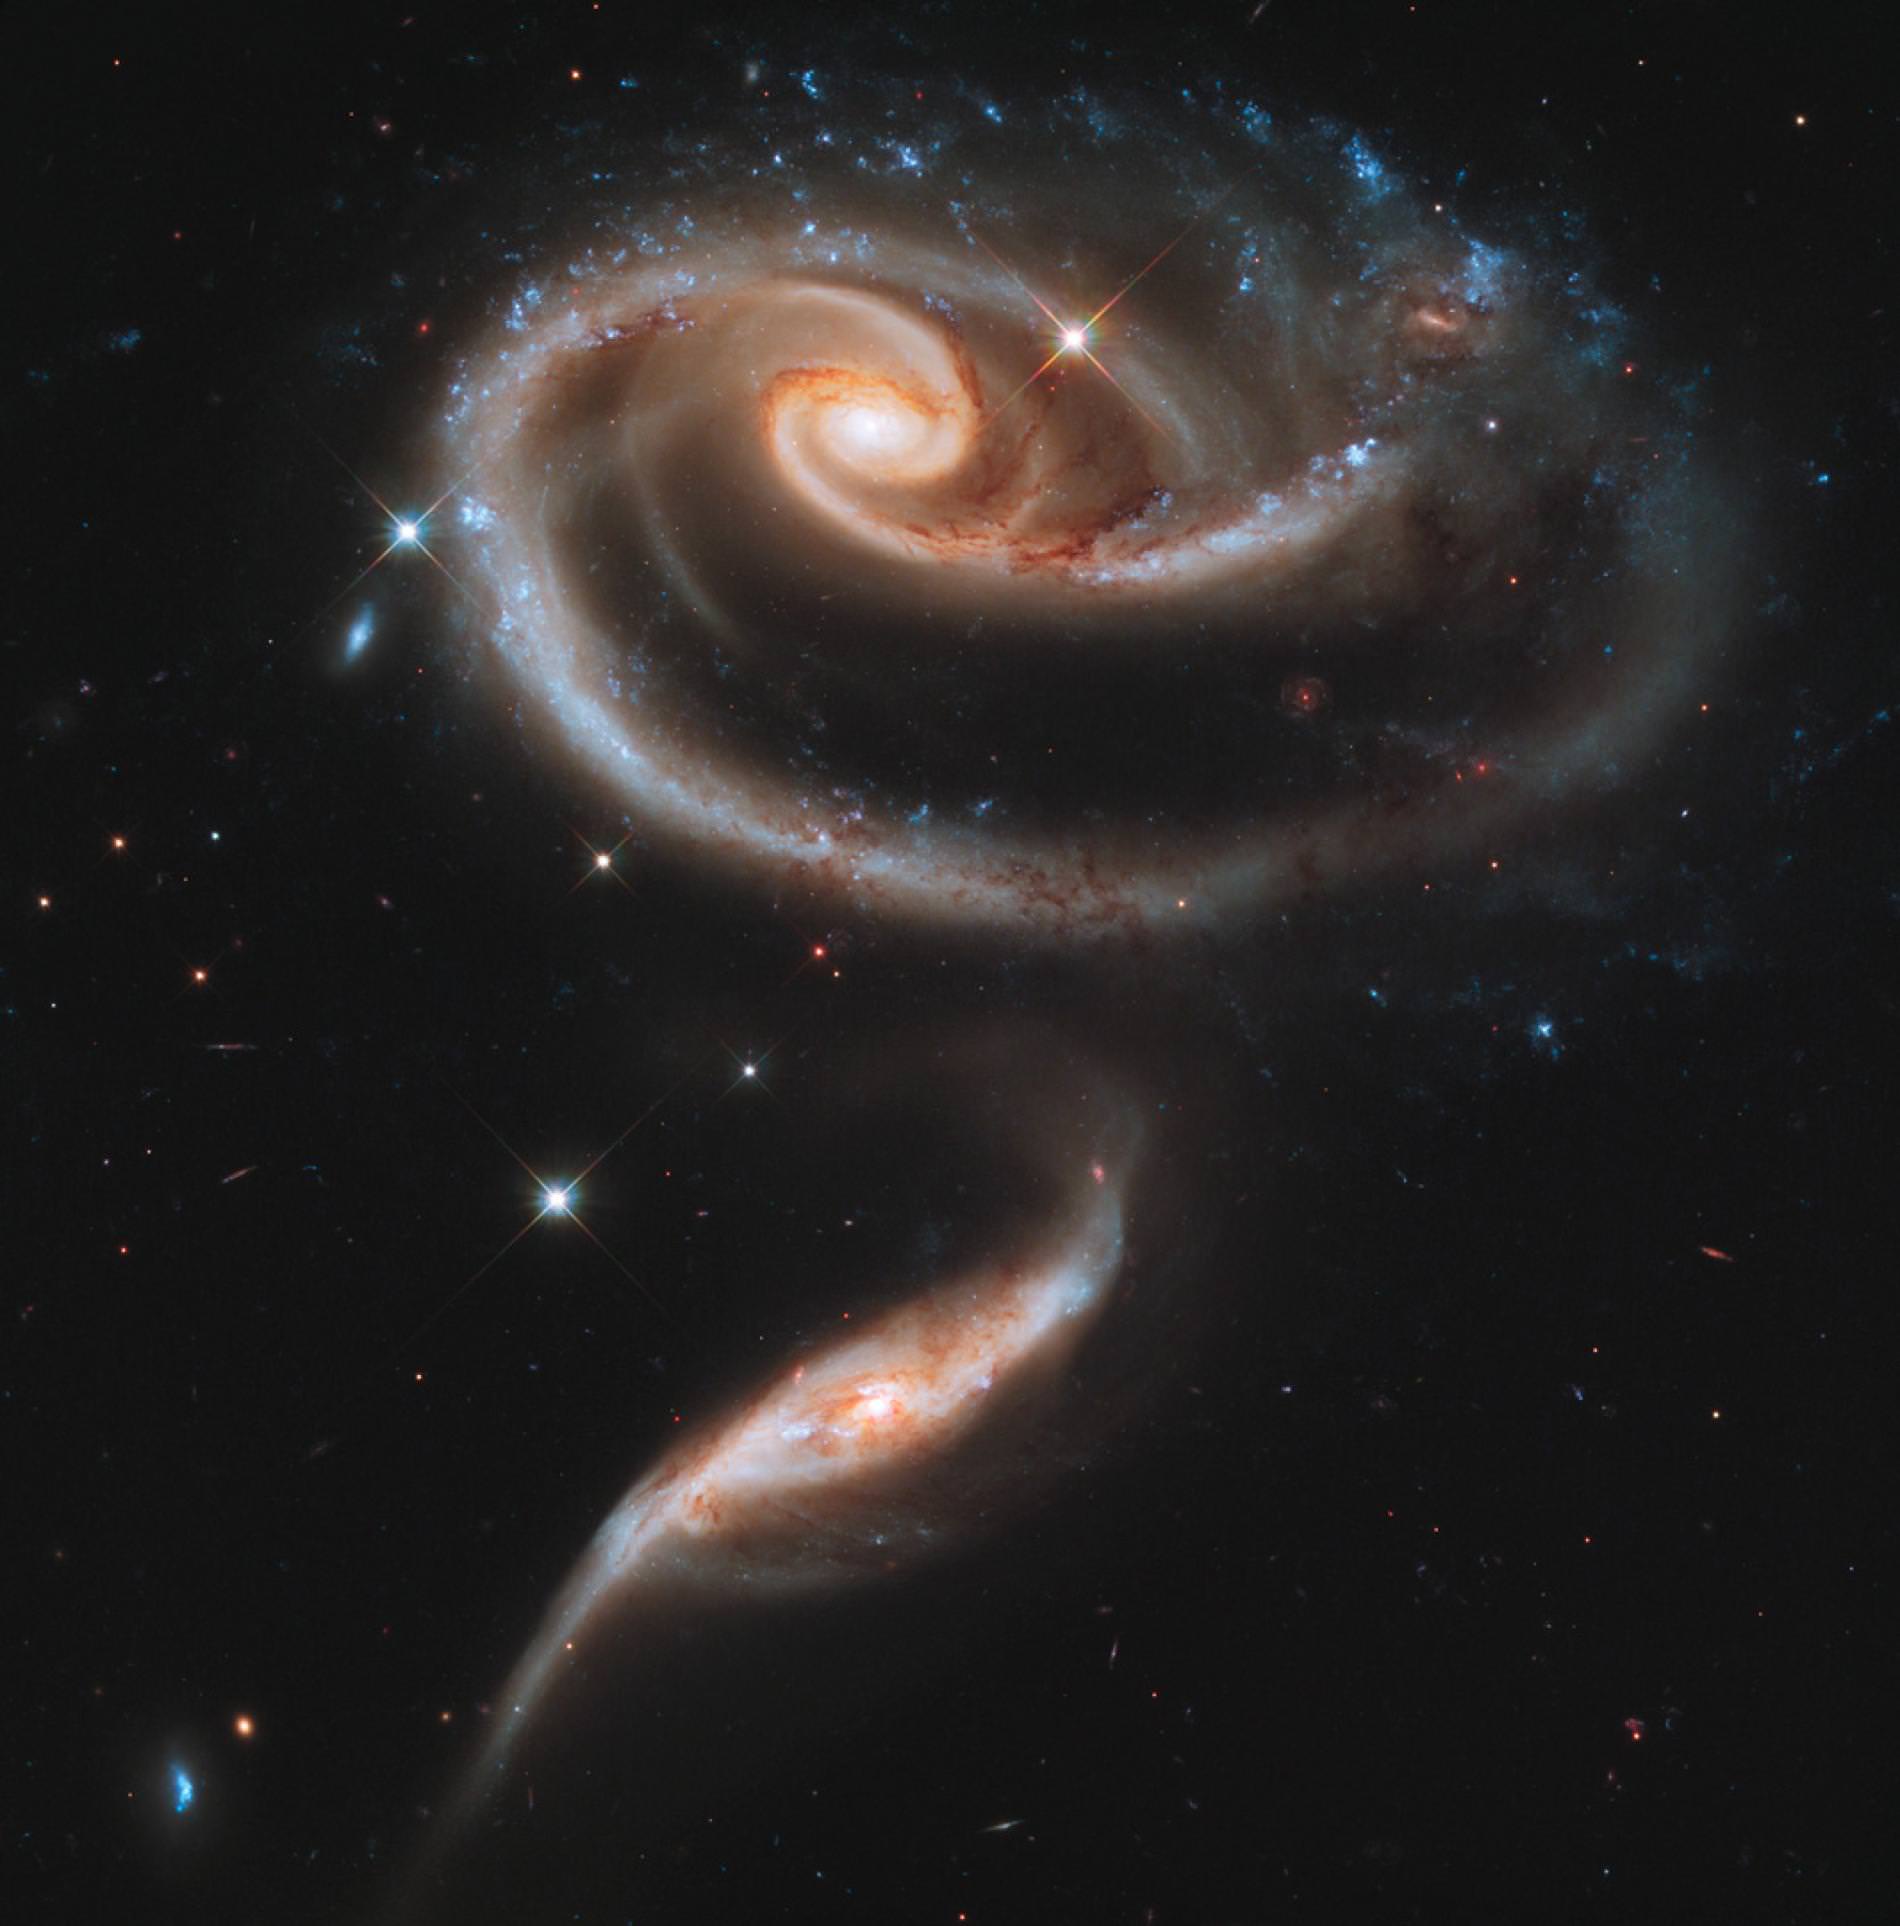 Arp 273, two spiral galaxies